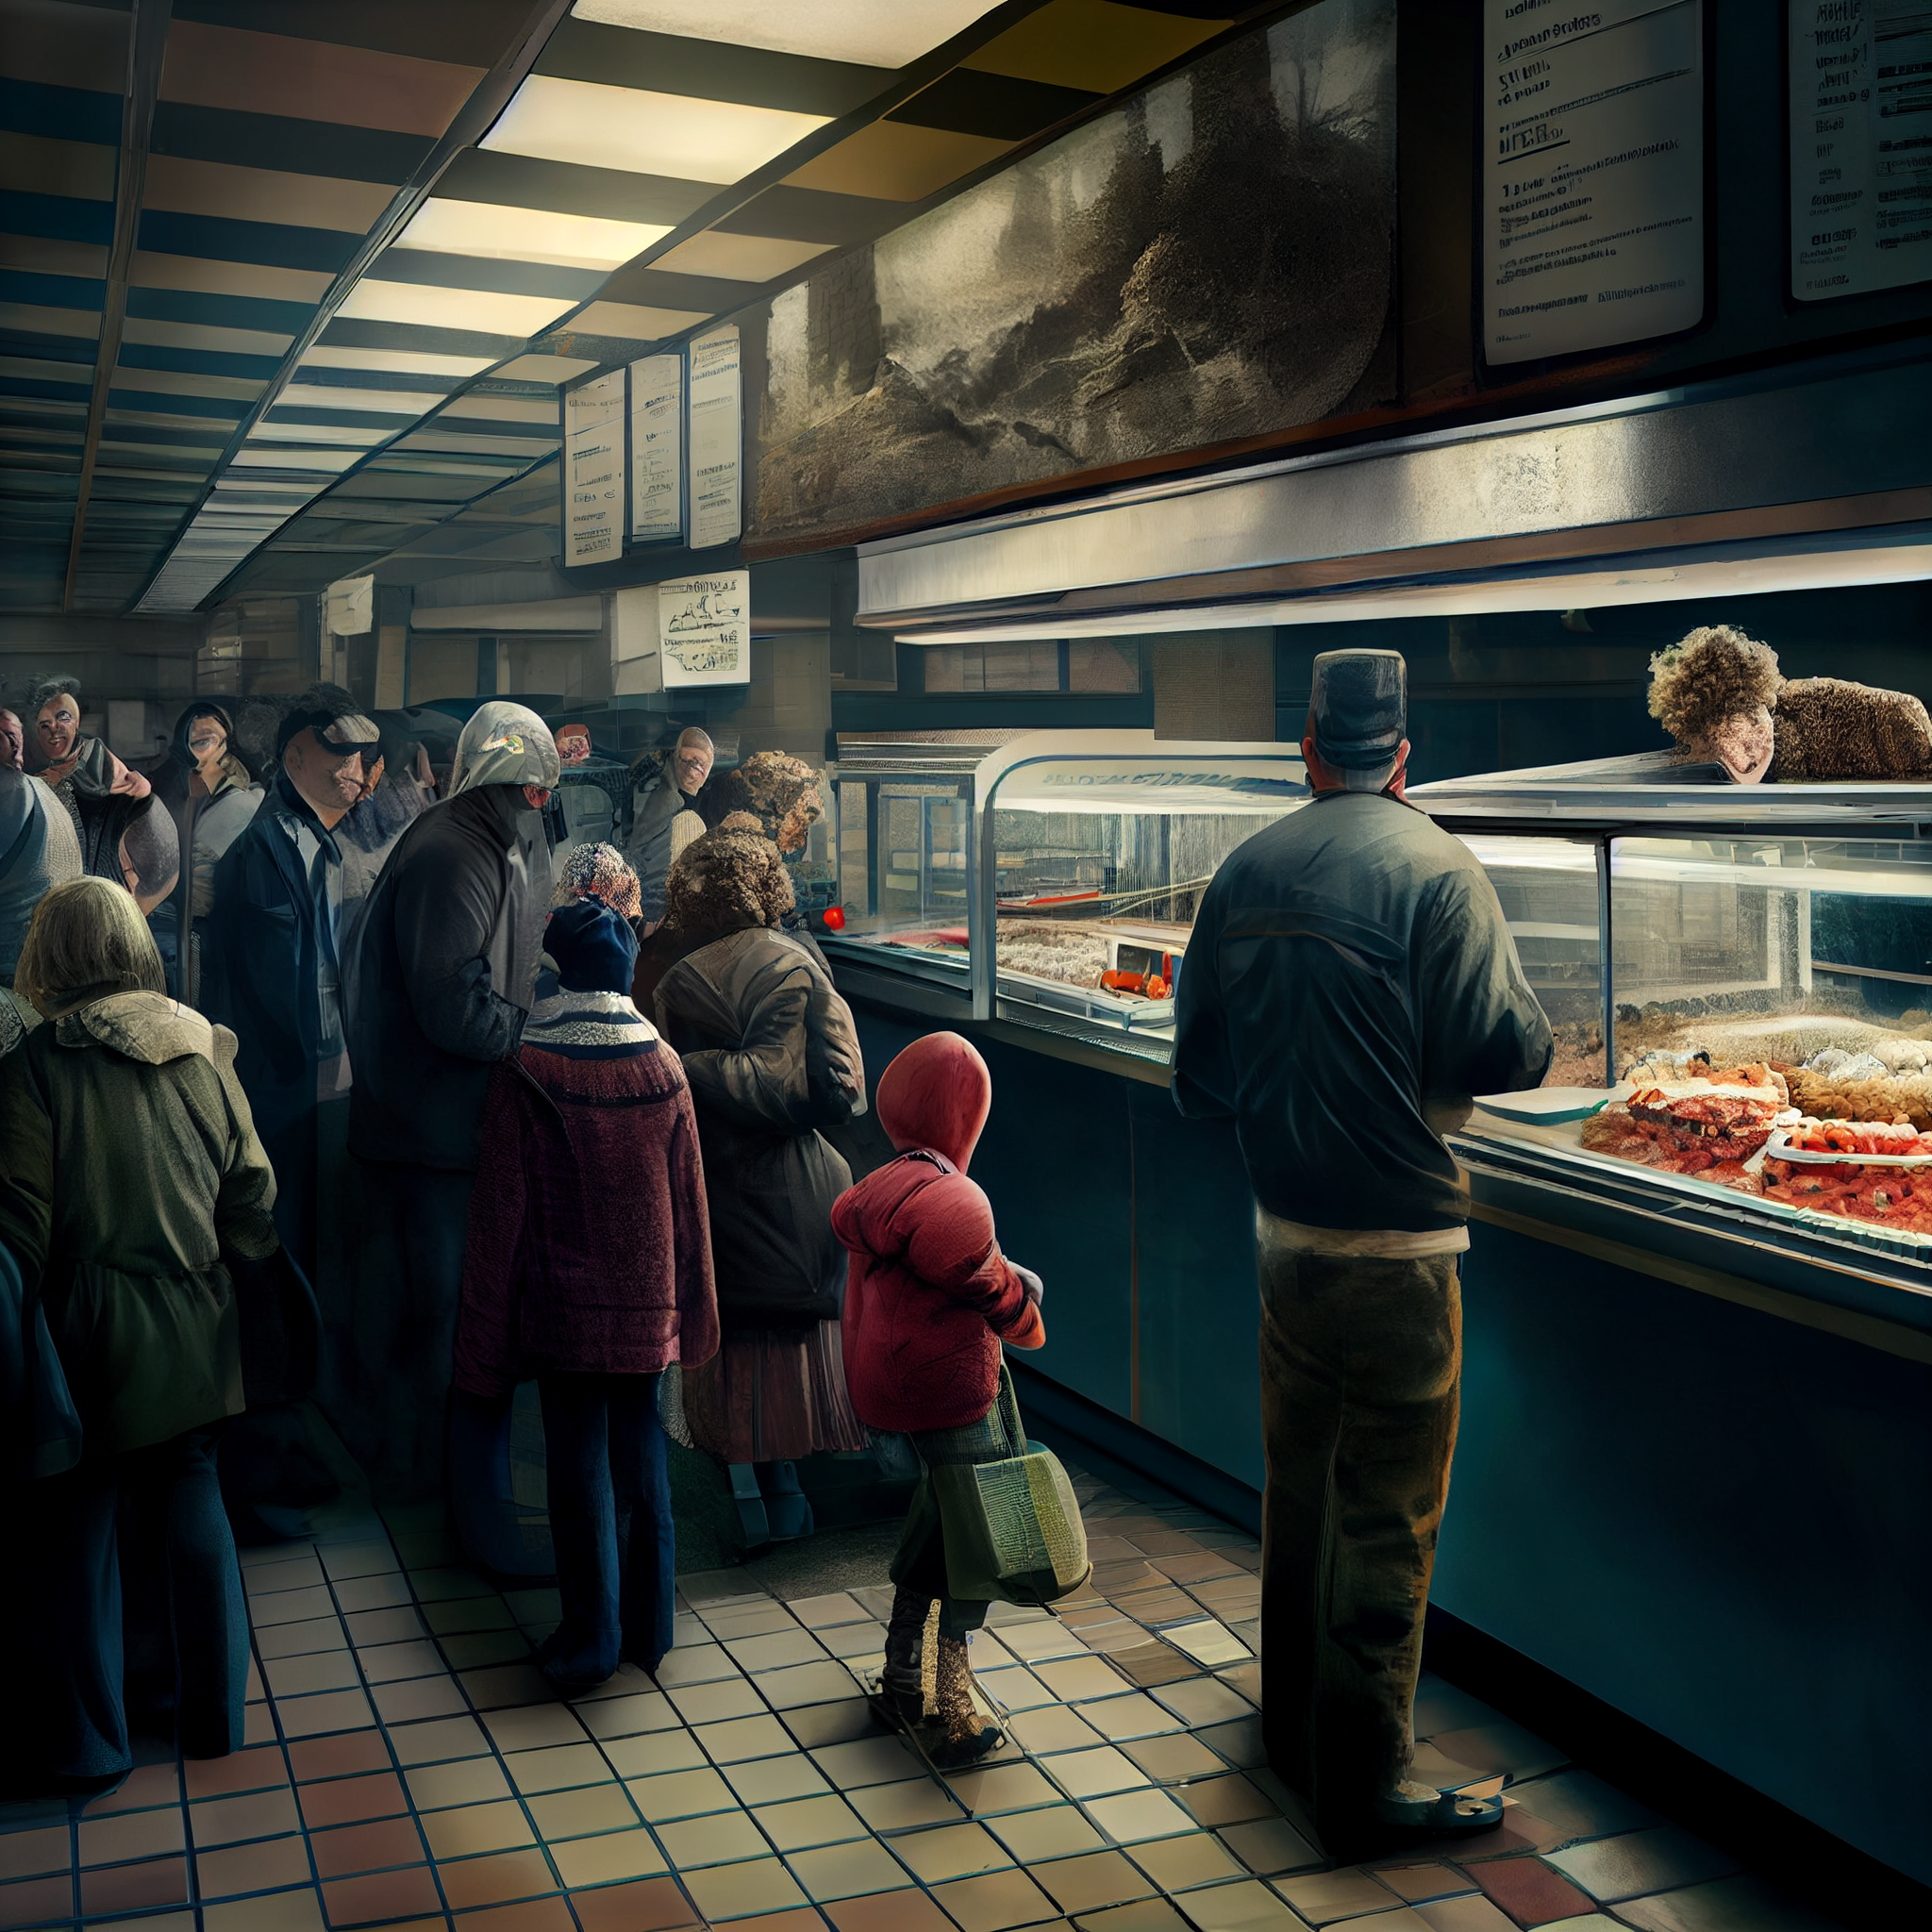 Beggars_a_dystopian_future_where_everyone_lines_up_for_food_hig_d8819419c23a4685979609ffaf43ef8d.png